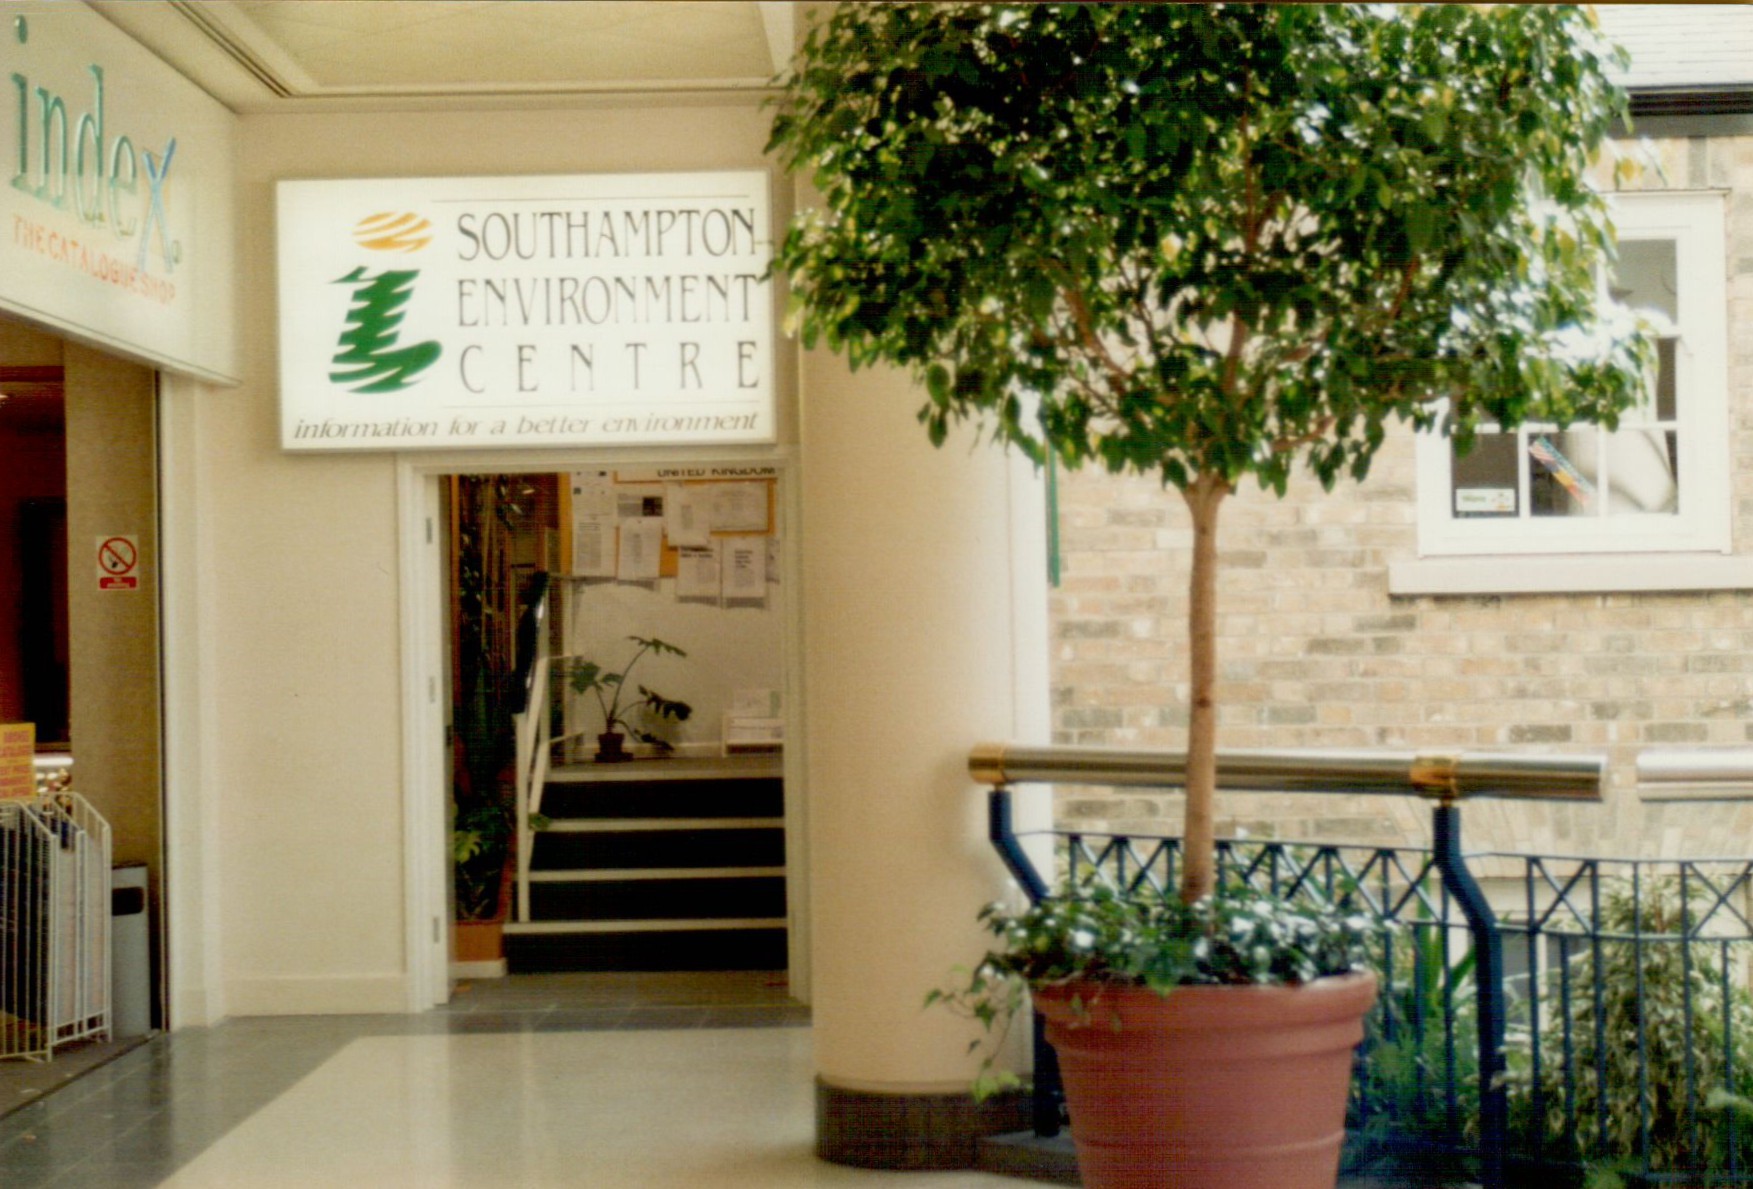 The Southampton Environment Centre in its early days.